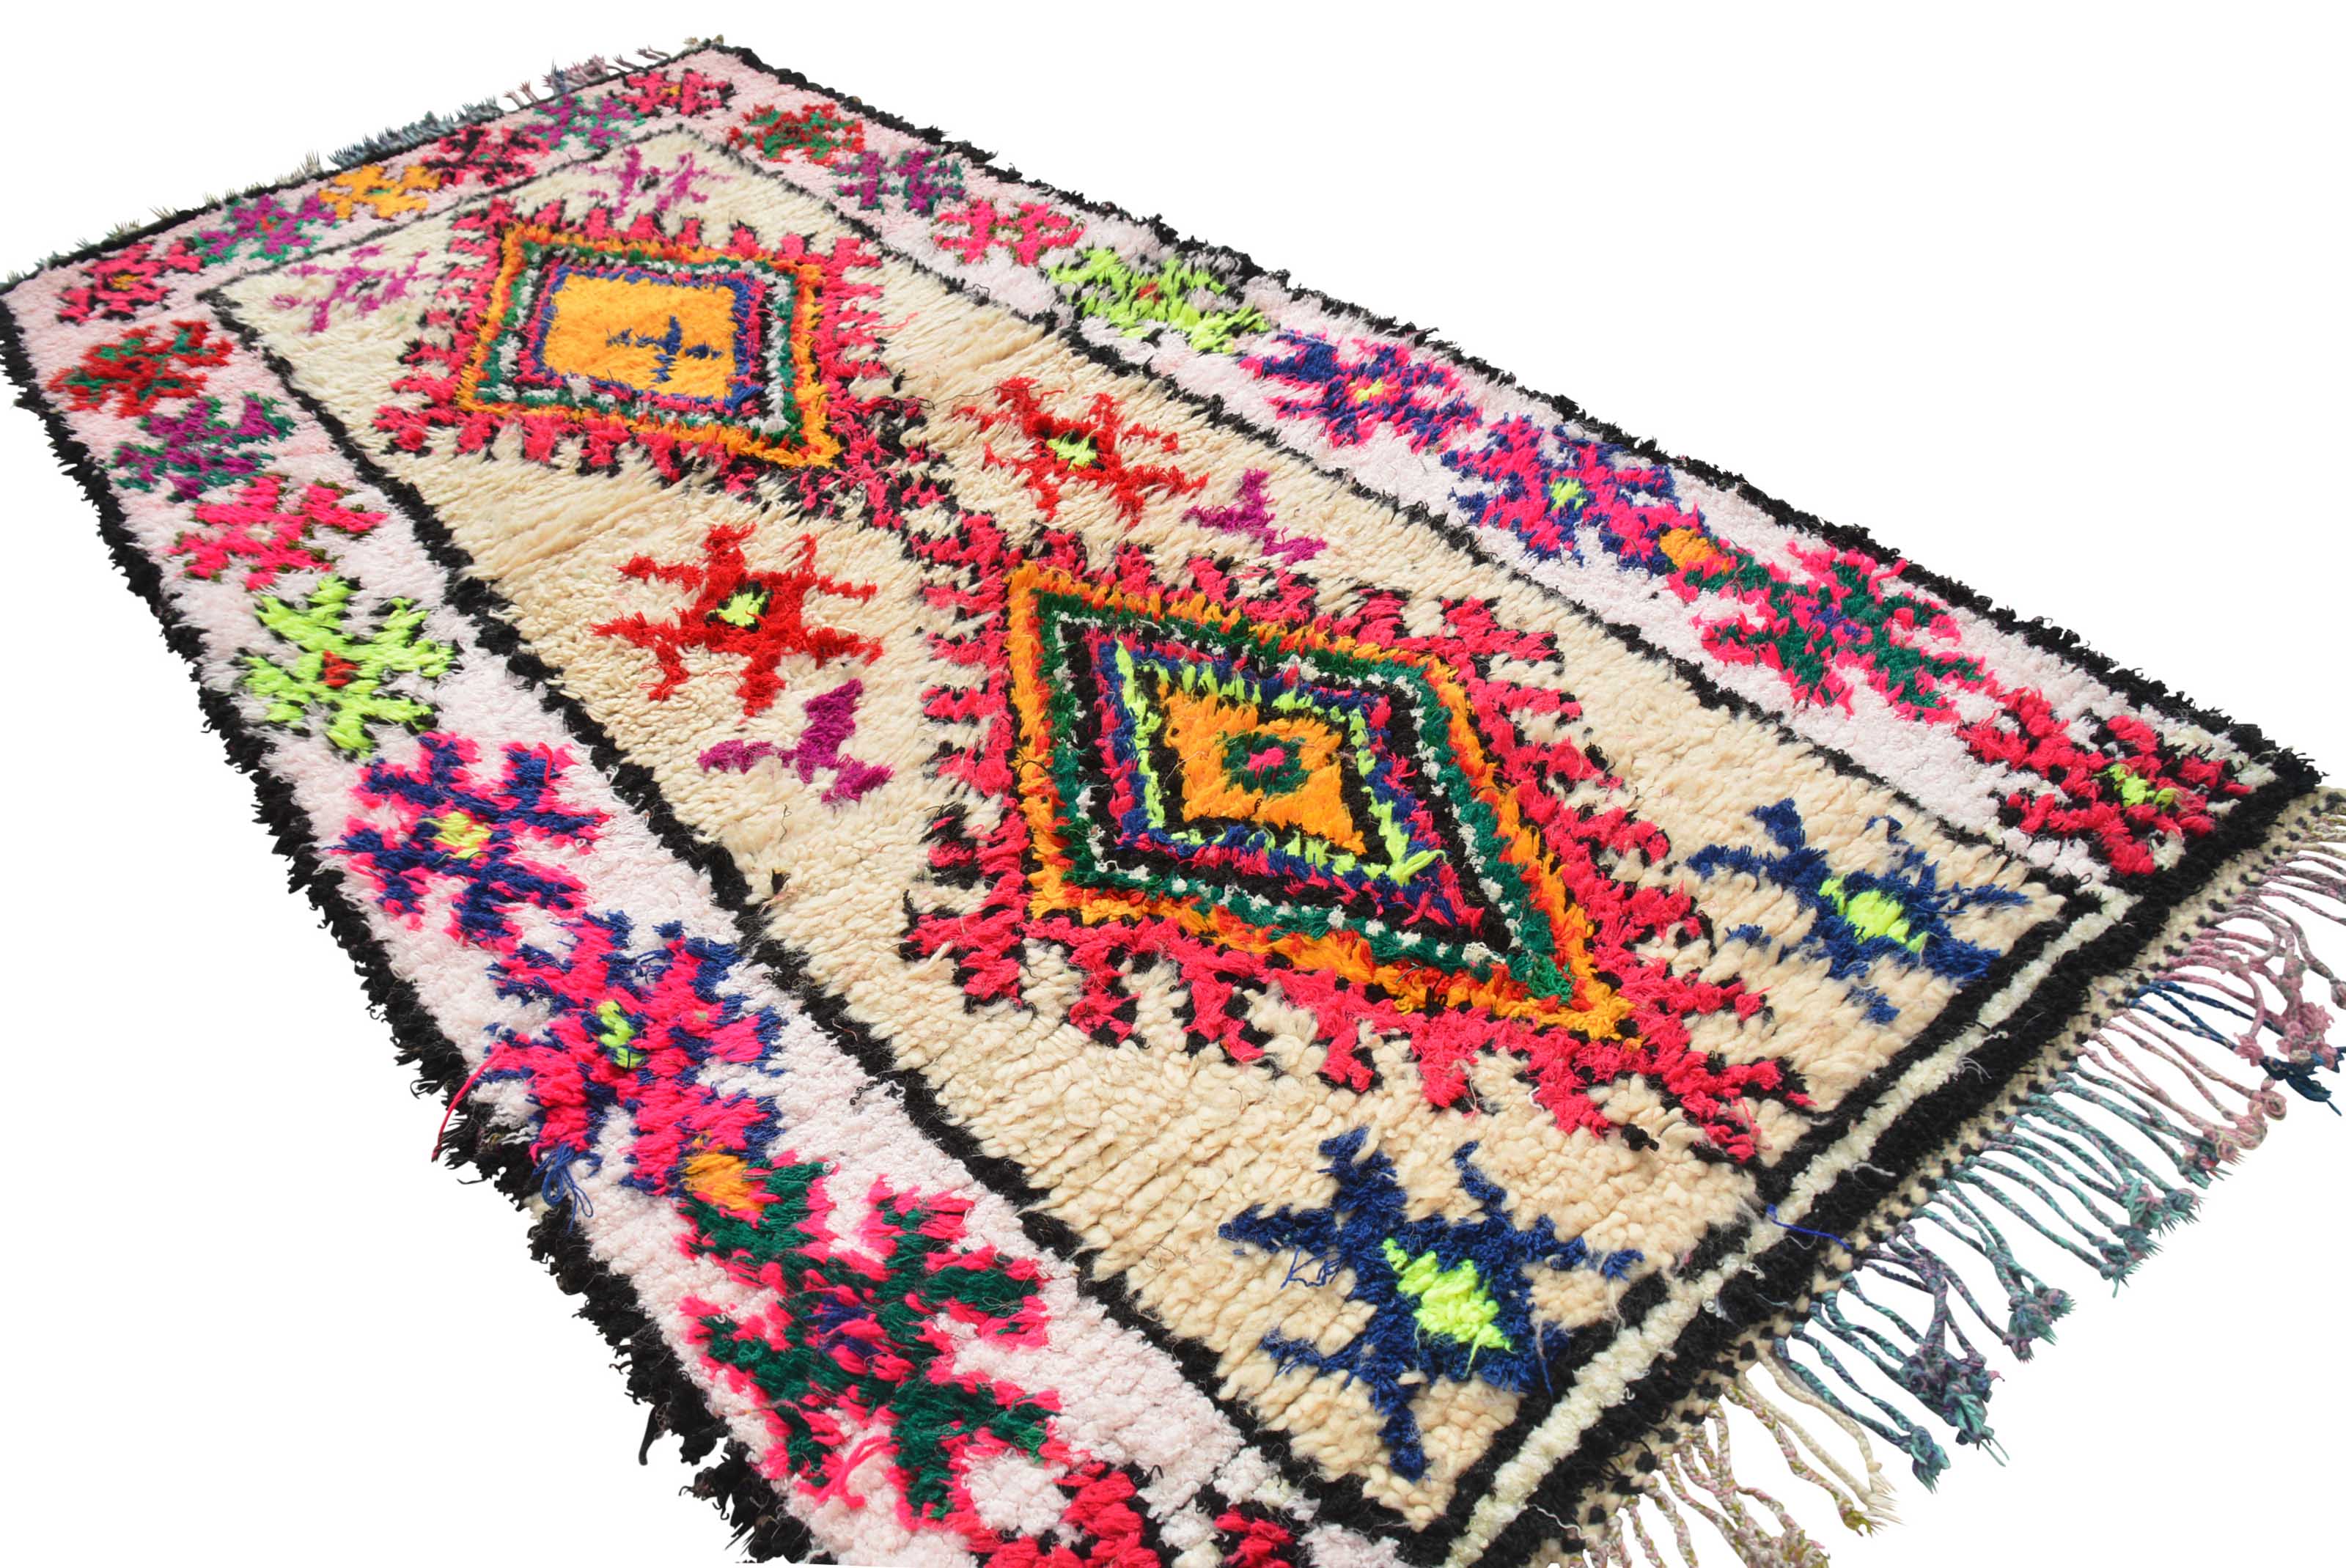 Vintage Moroccan Rug Vintage Inspired Runner Rugs | Moroccan Style Rug | Illuminate Collective illuminate collective 